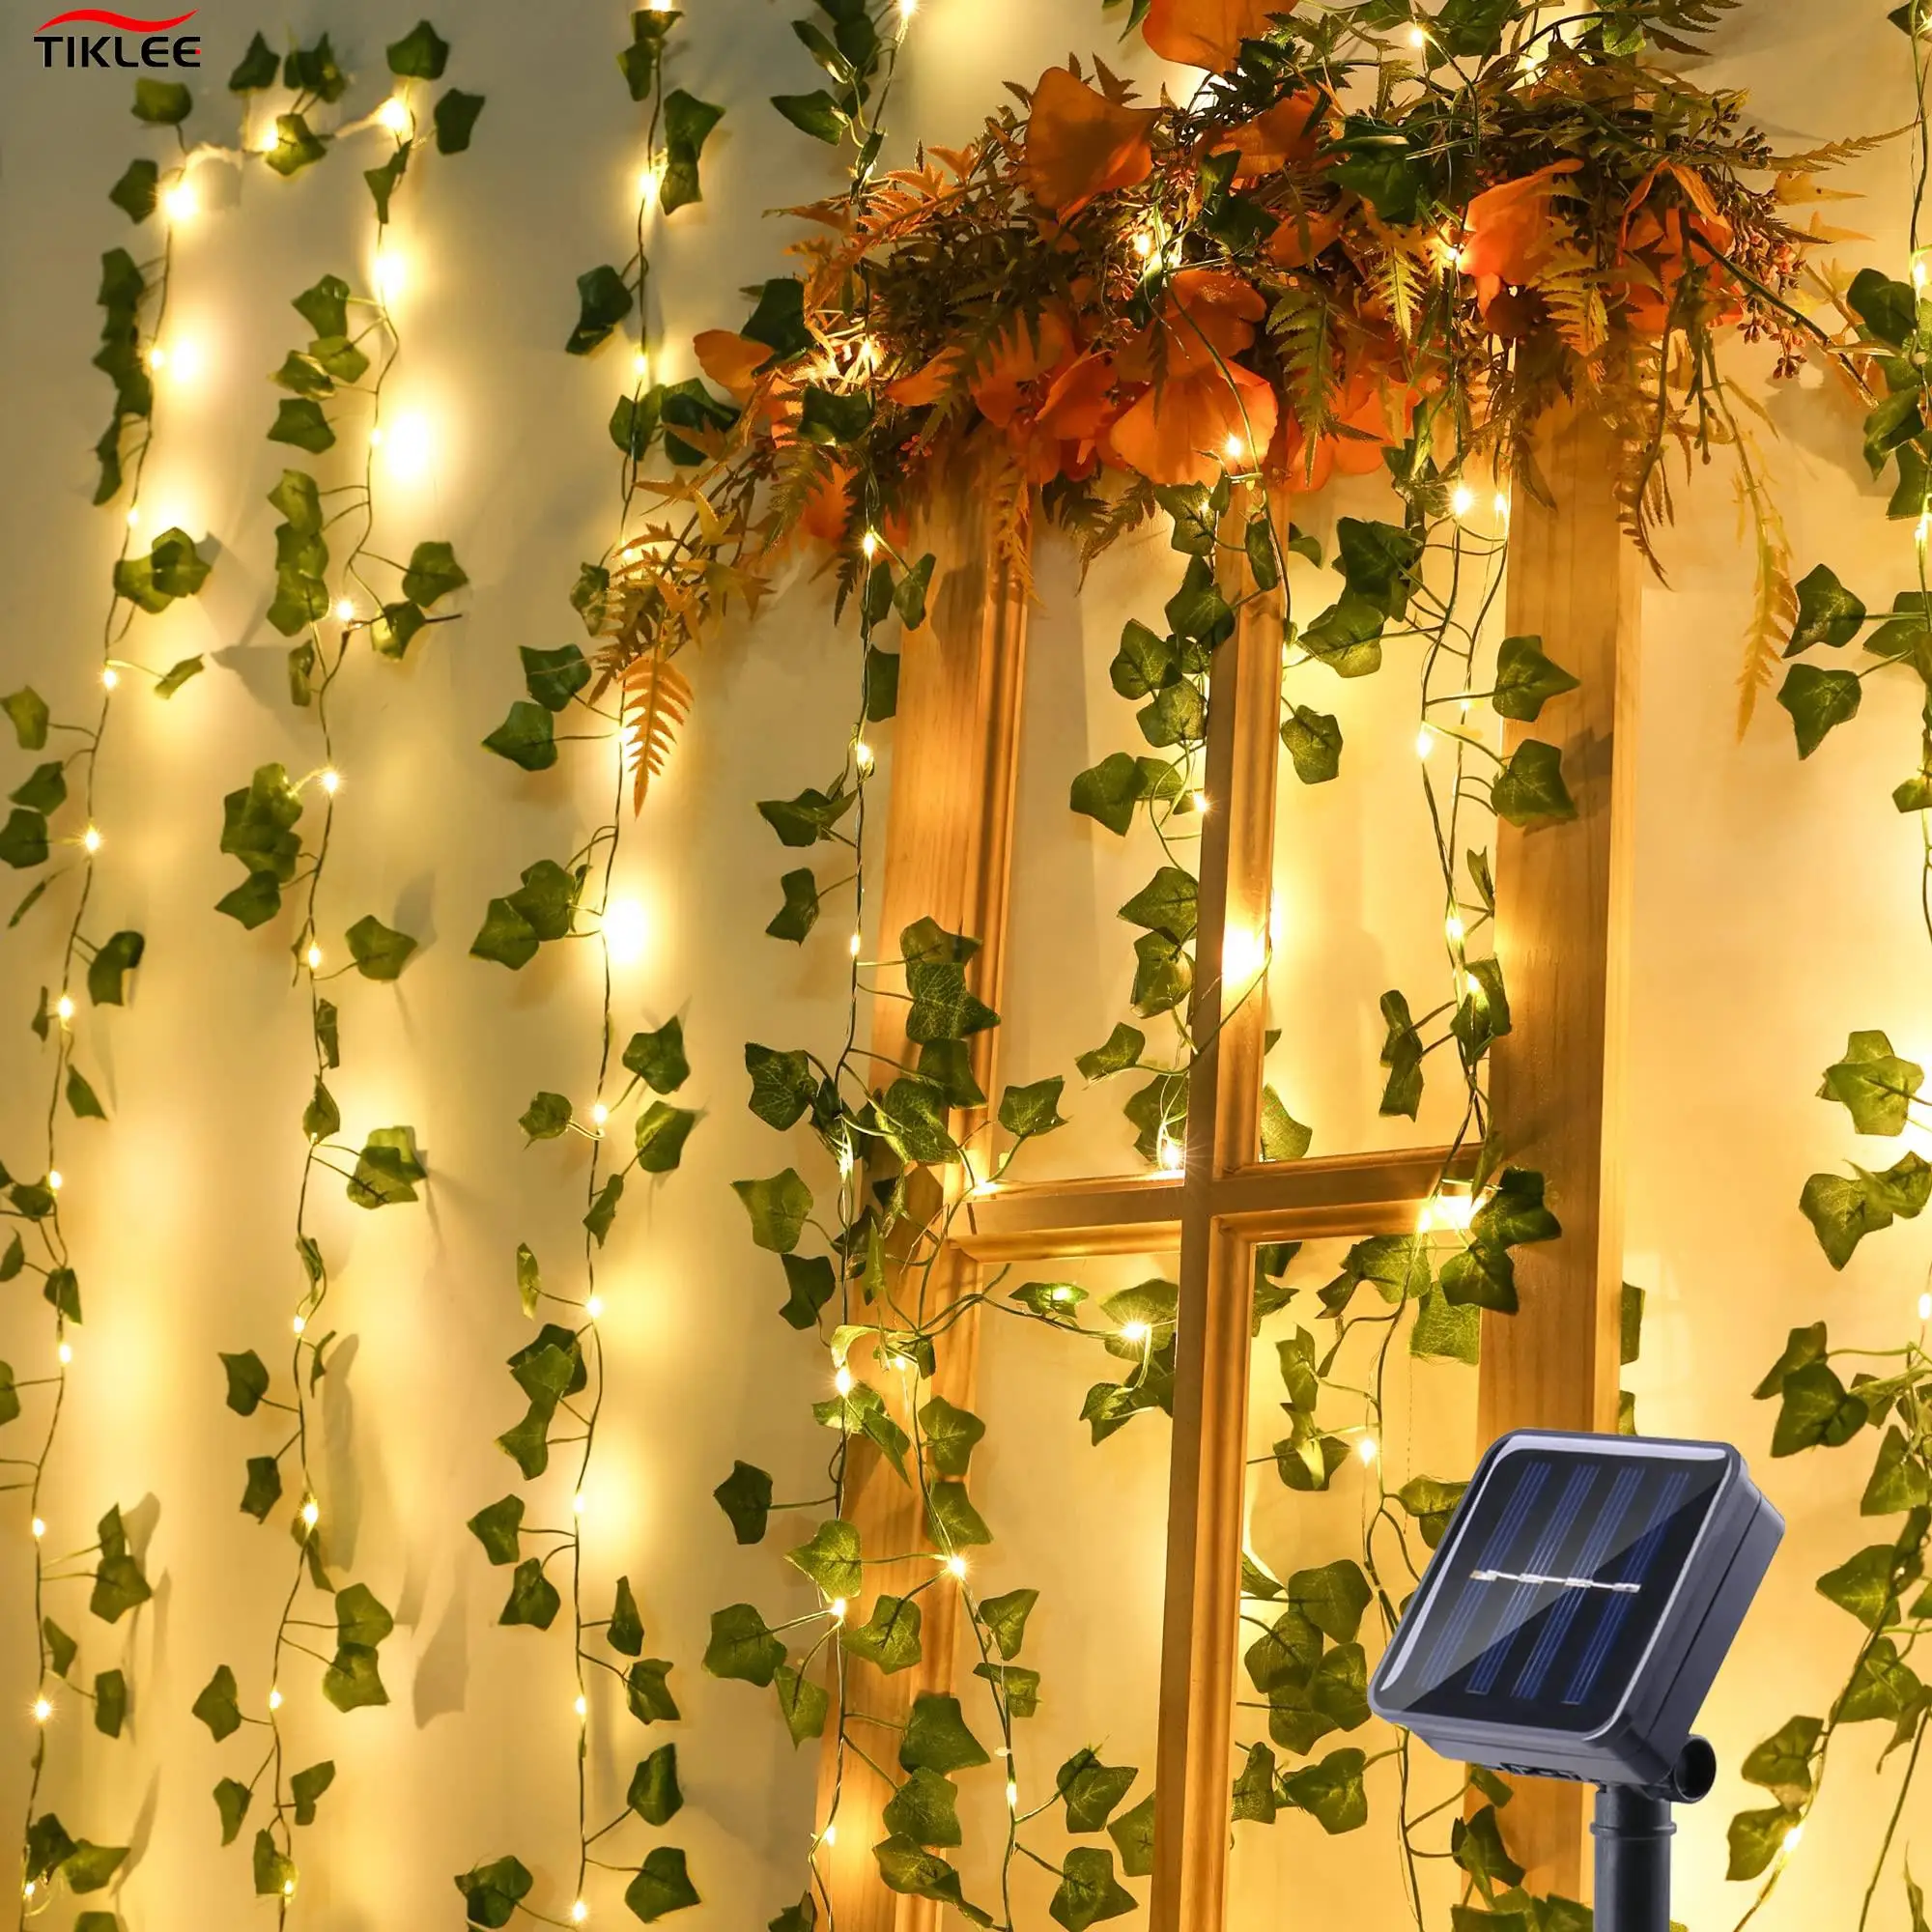 50/100 Solar Leds Green Leaf Fairy Lights String Artificial Ivy Garland Copper Light Strings for Wedding Bedroom Decorations rgb stage light music high powerful stative led strobe programmable hanging lights scaffold luces fiesta karaoke decorations